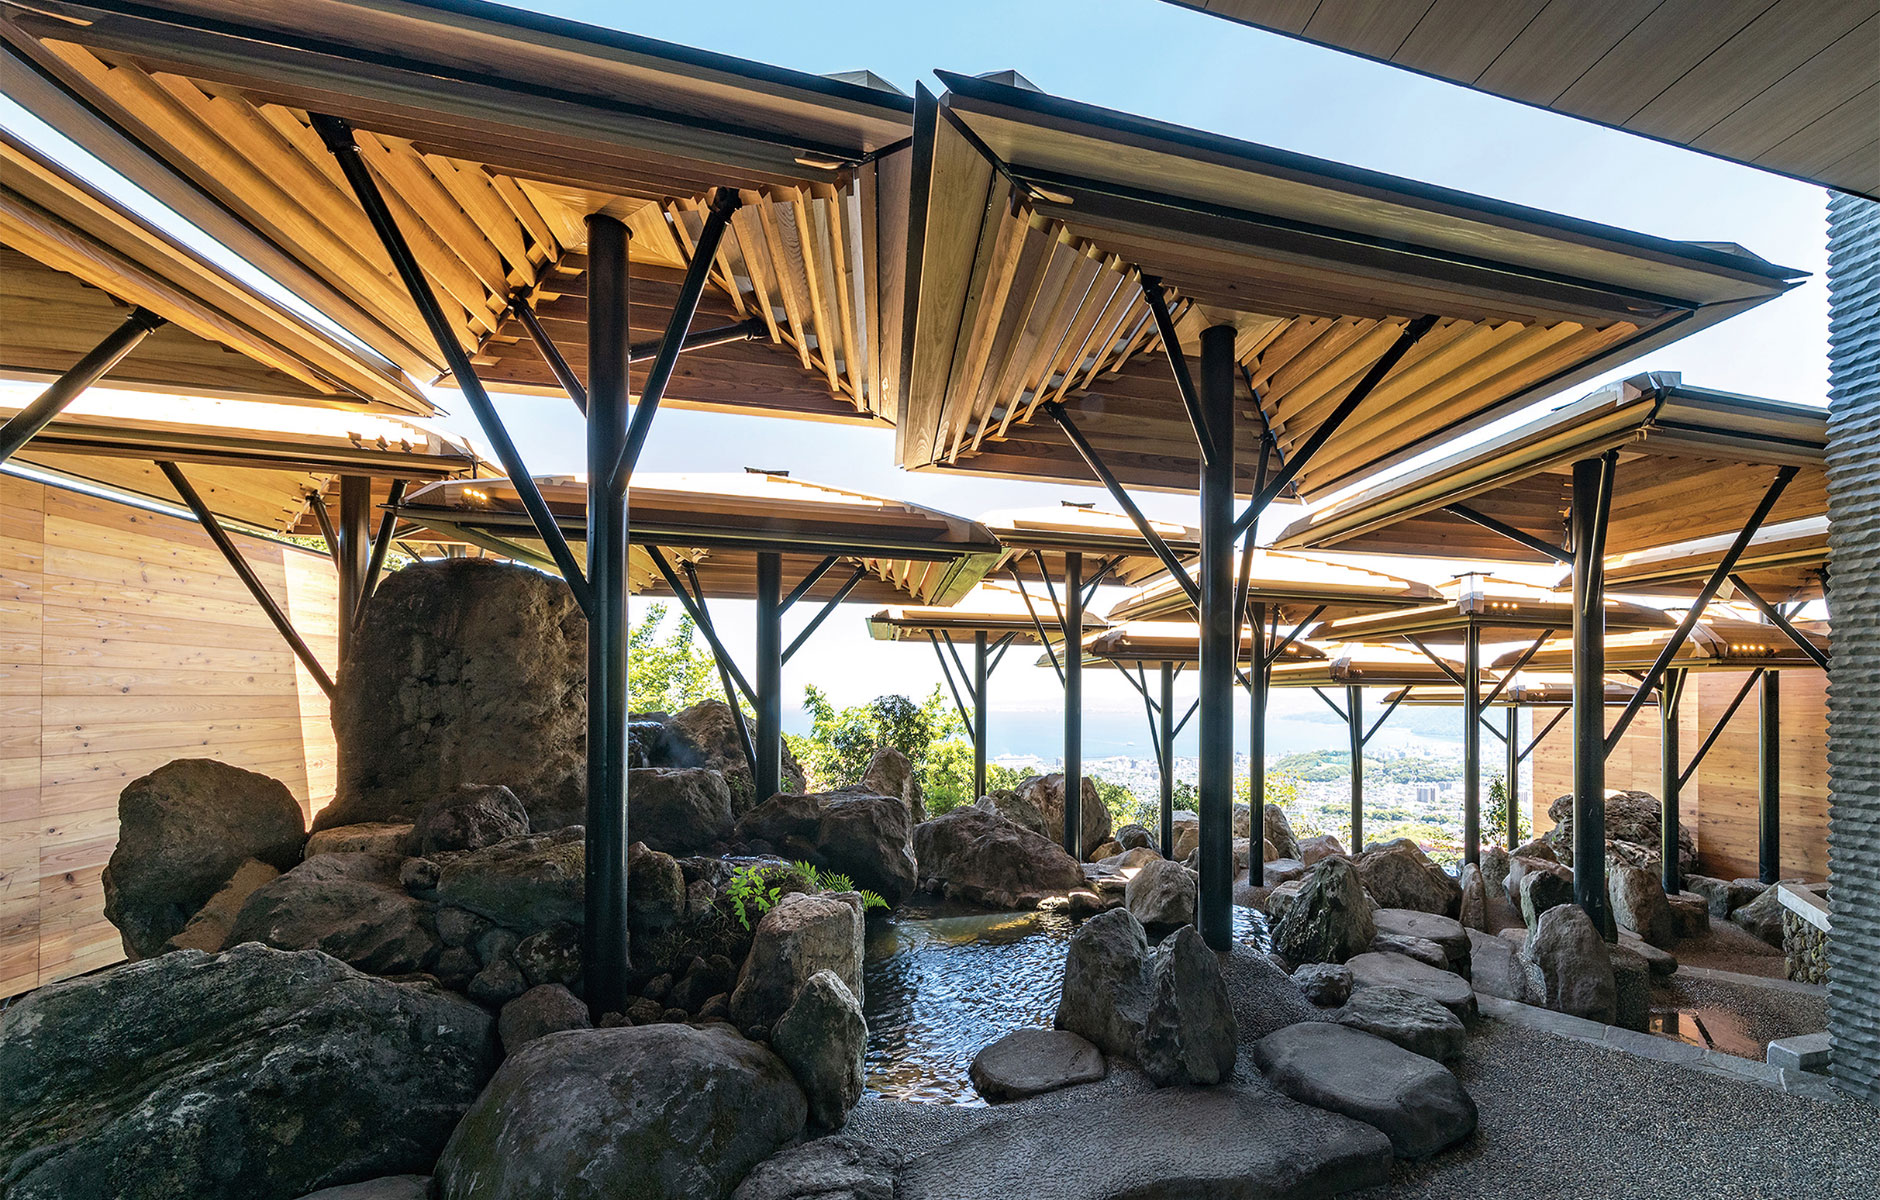 The outdoor bath on the first floor with its impressive massive Beppu stone boulders and umbrellas made of cedar louvers.